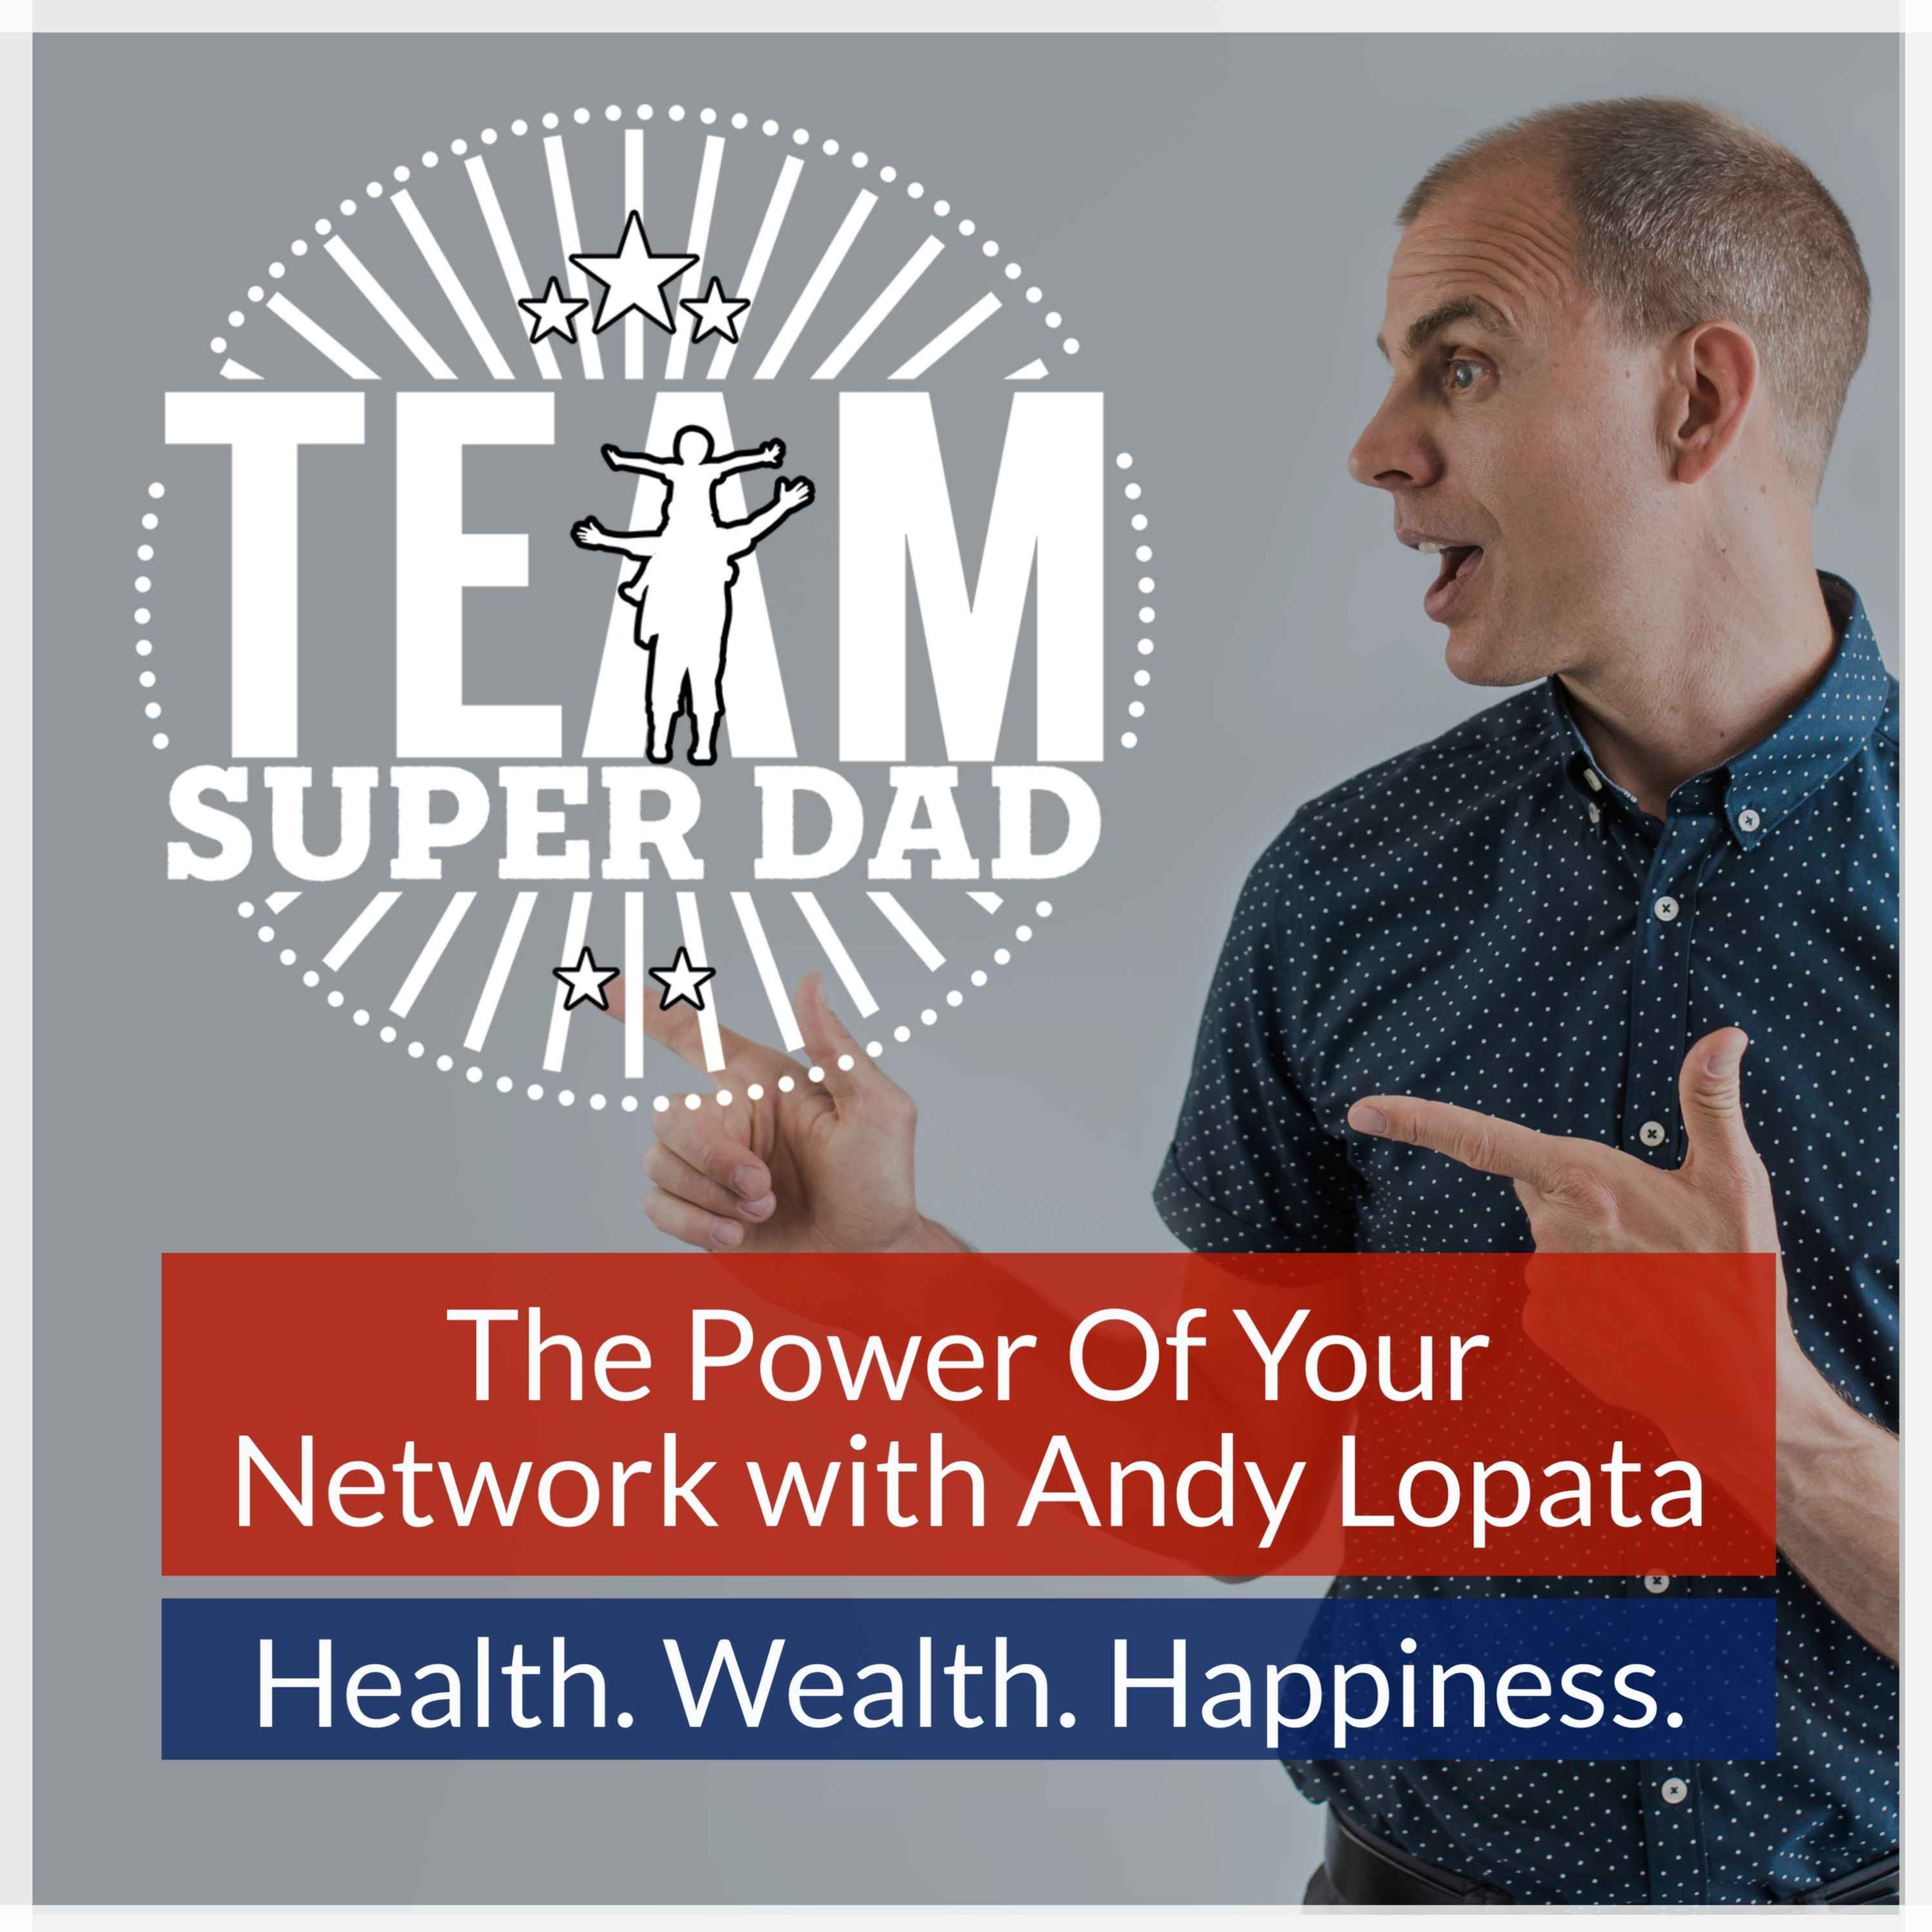 How To Use The Power Of Your Network with Andy Lopata